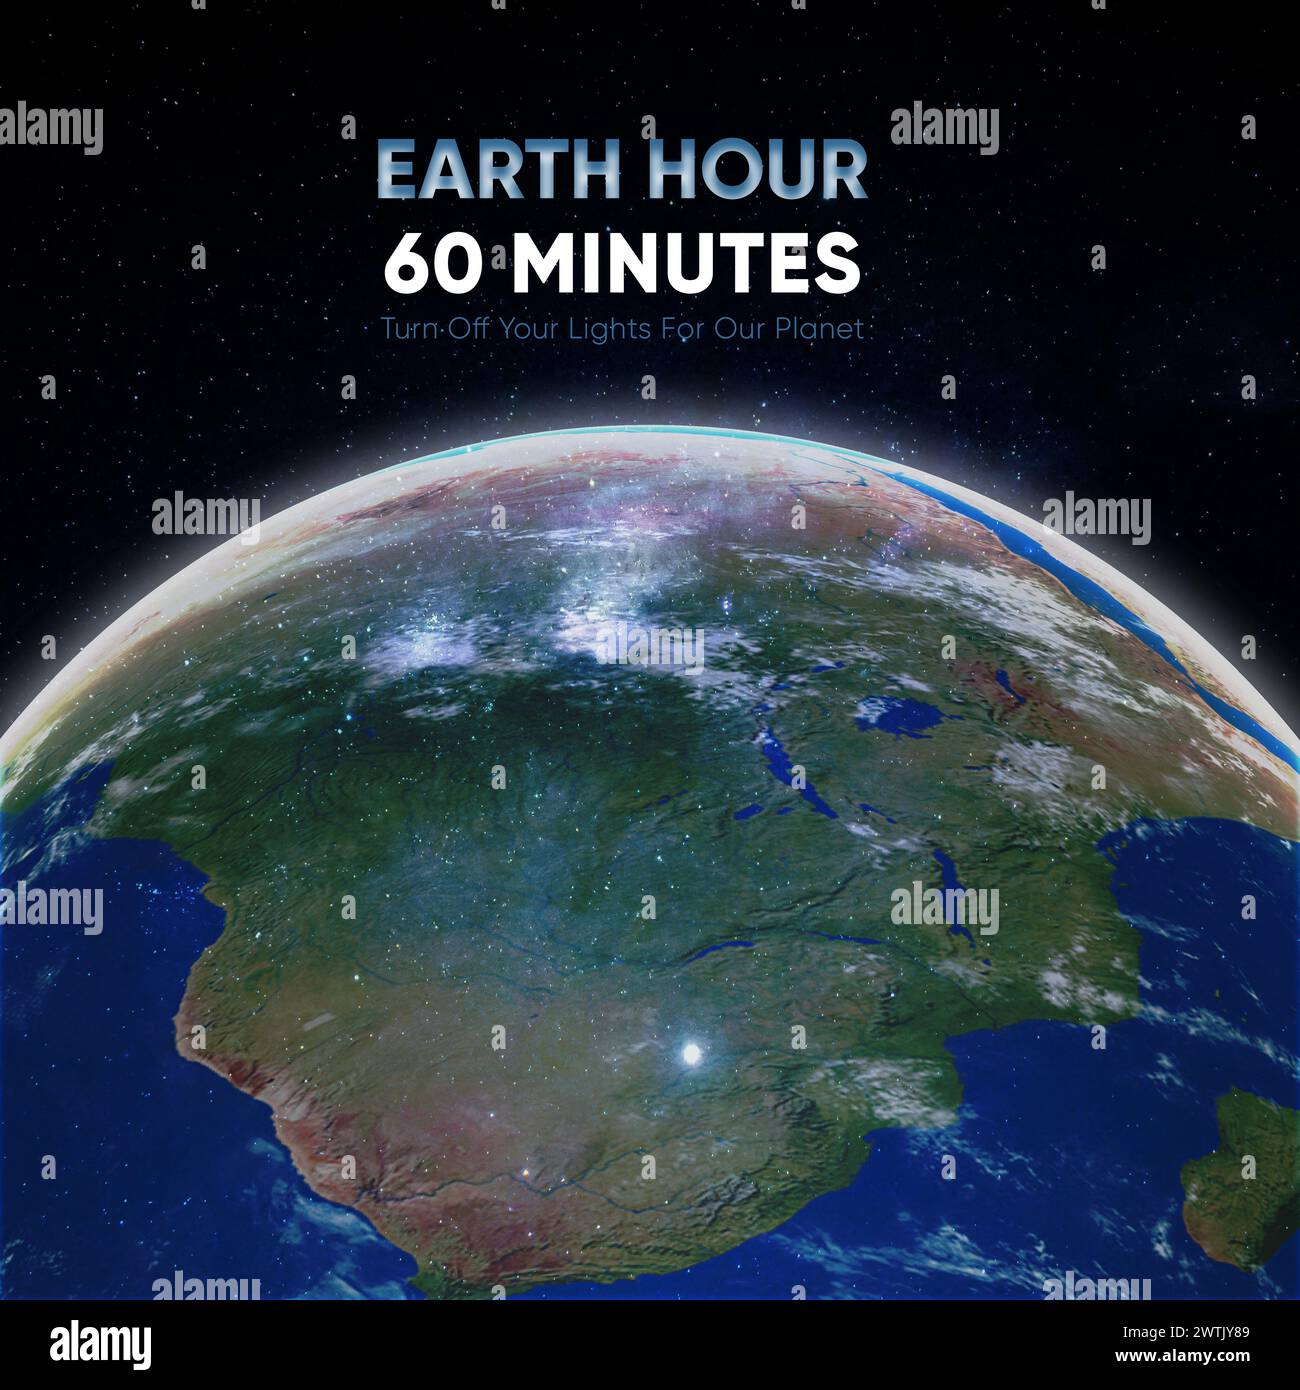 Earth Hour 60 minutes poster campaign. Planet Earth in outer space. Turn off your lights. Climate change and to save Earth. Stock Photo